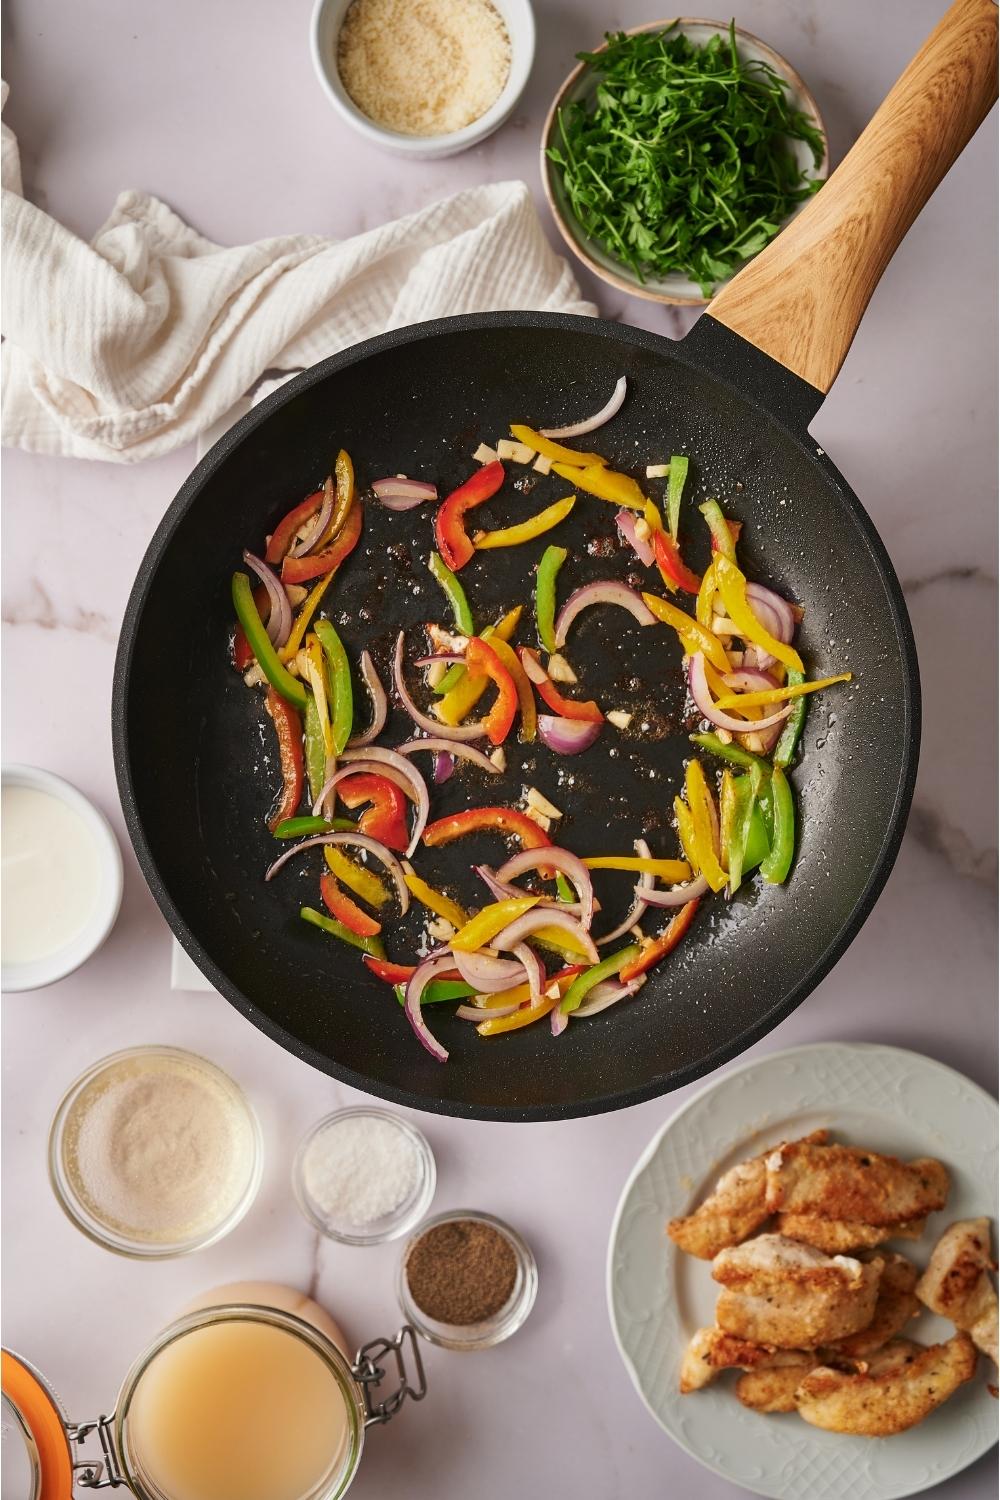 Skillet containing cooked sliced bell peppers, red onion, and garlic. Surrounding the pan are plates of ingredients including cooked chicken, salt, pepper, parsley, and cheese.